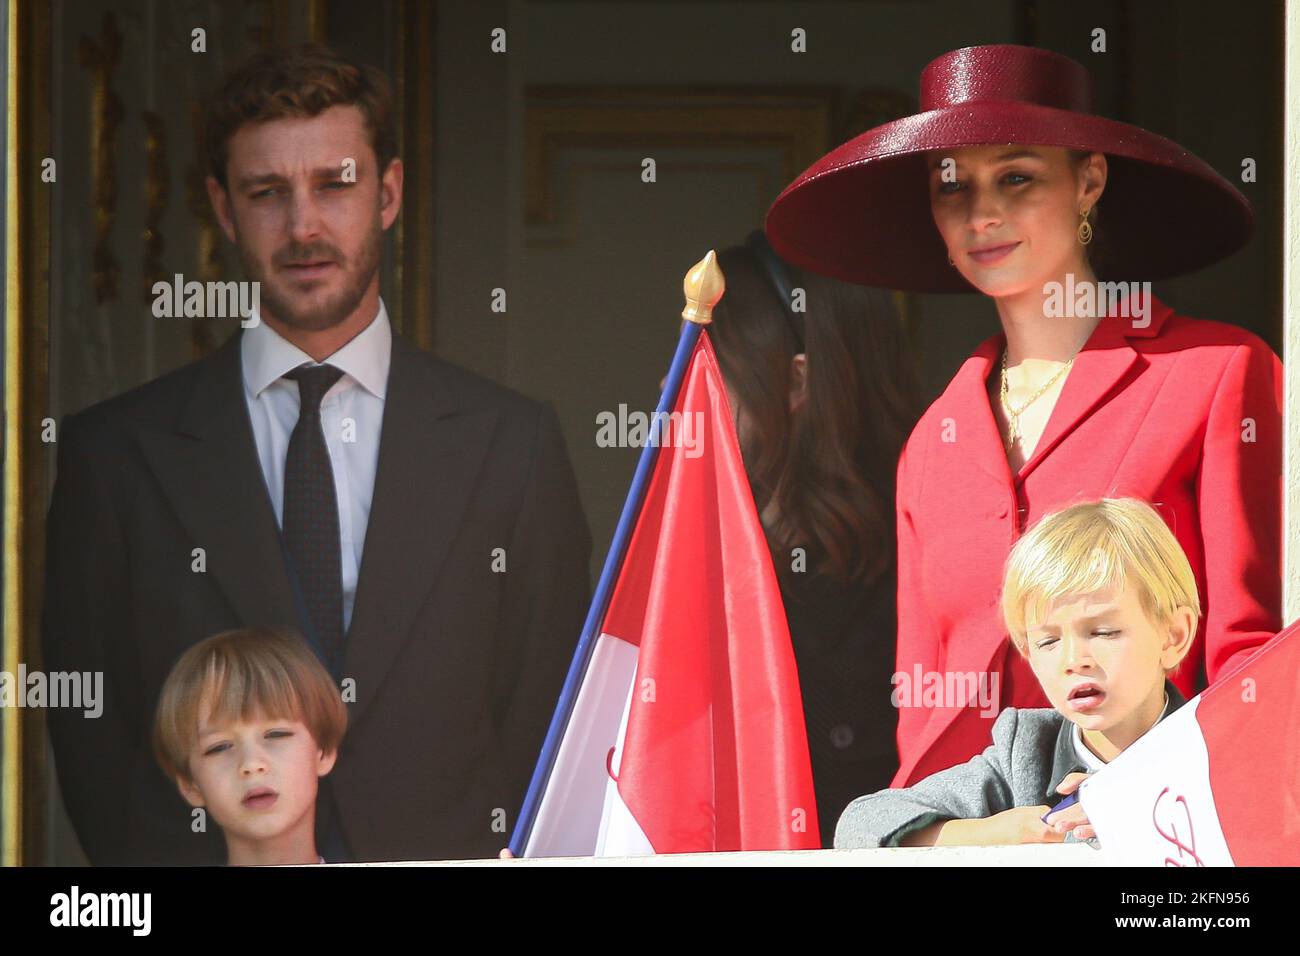 Princess Alexandra of Hanover, Pierre Casiraghi, Francesco Casiraghi, Stefano Casiraghi, Beatrice Borromeo are attending the parade at the palace balcony during the celebration for the National Day on November 19, 2022 in Monaco Ville, Principality of Monaco. Photo by Marco Piovanotto/IPA - NO TABLOIDS Stock Photo